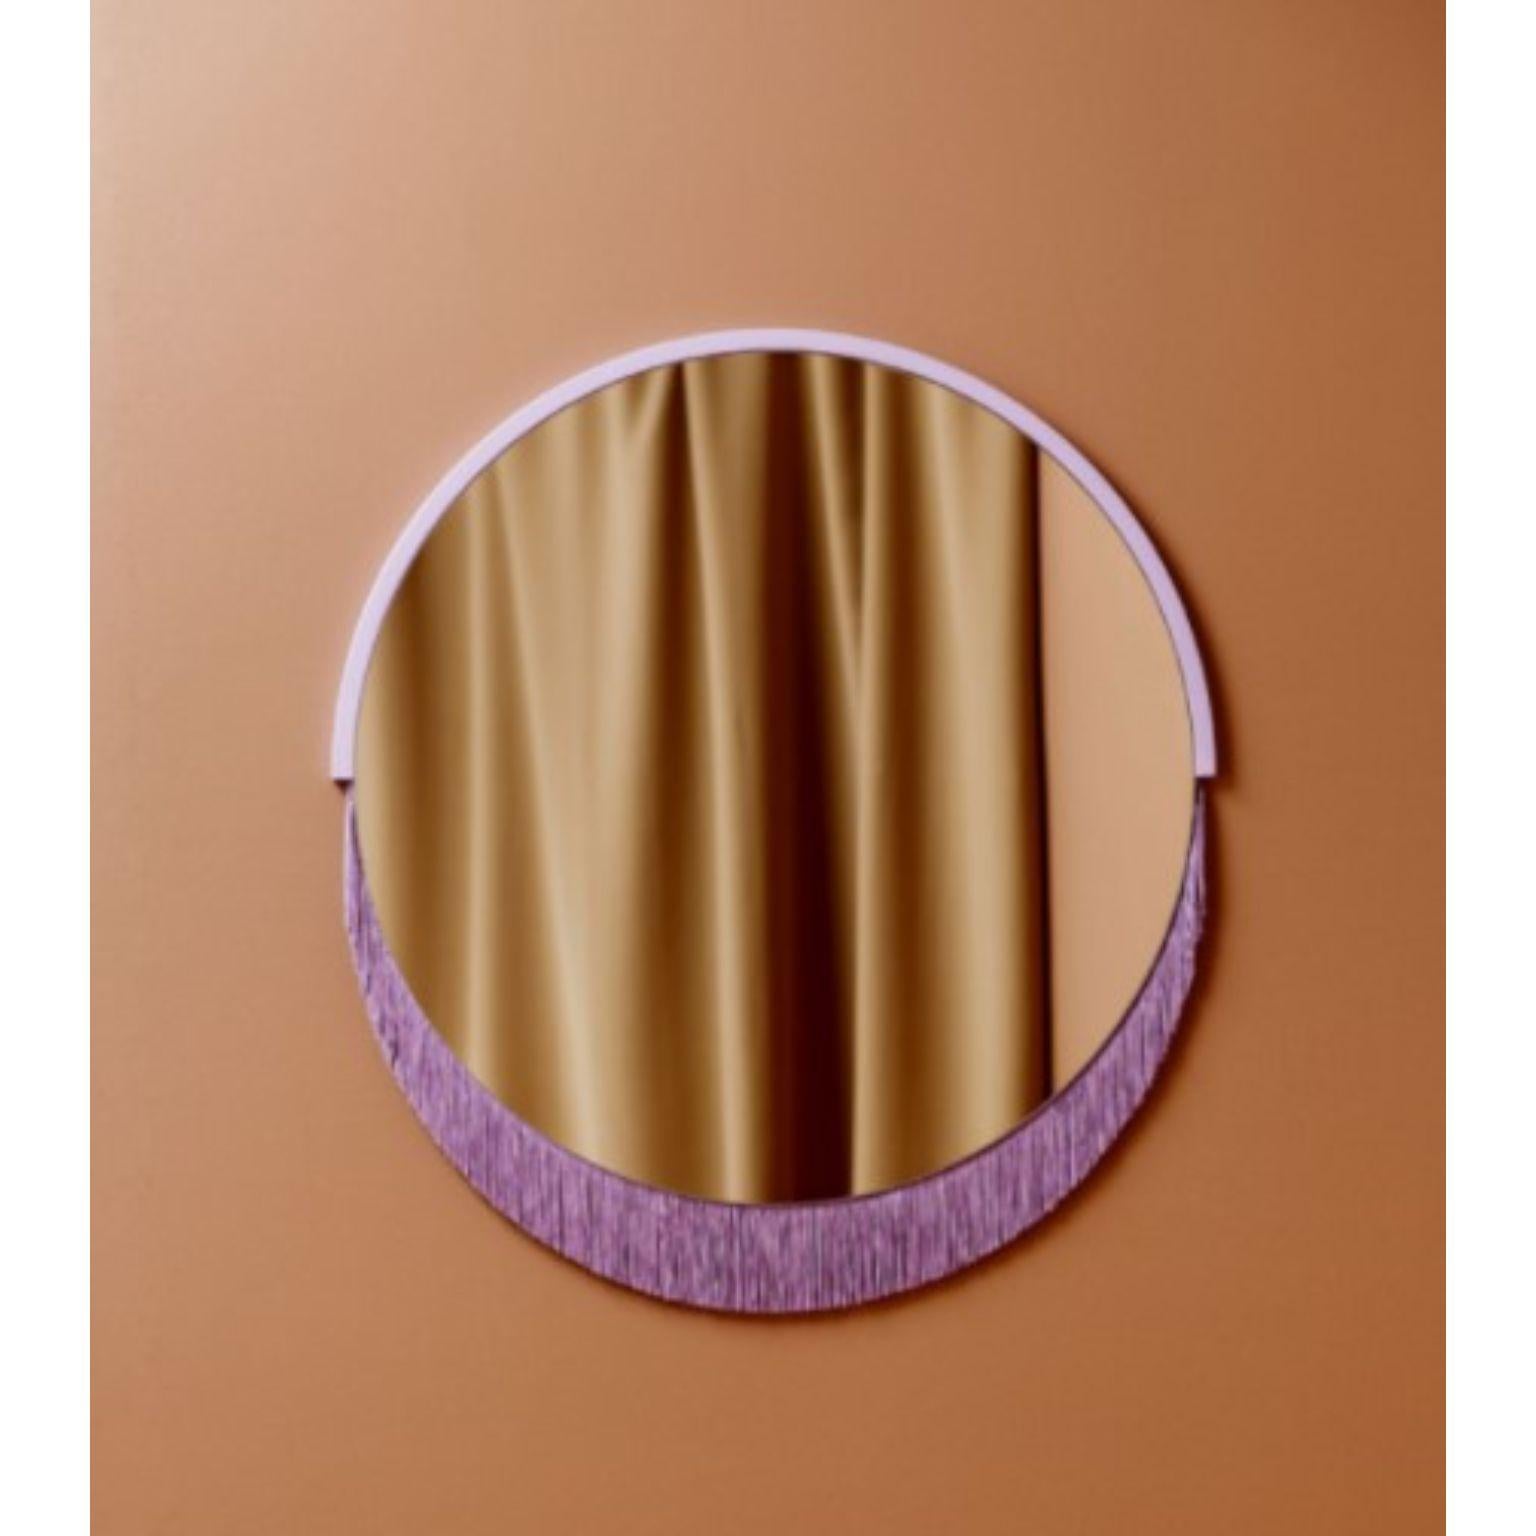 Post-Modern Boudoir Large Wall Mirror by Tero Kuitunen For Sale